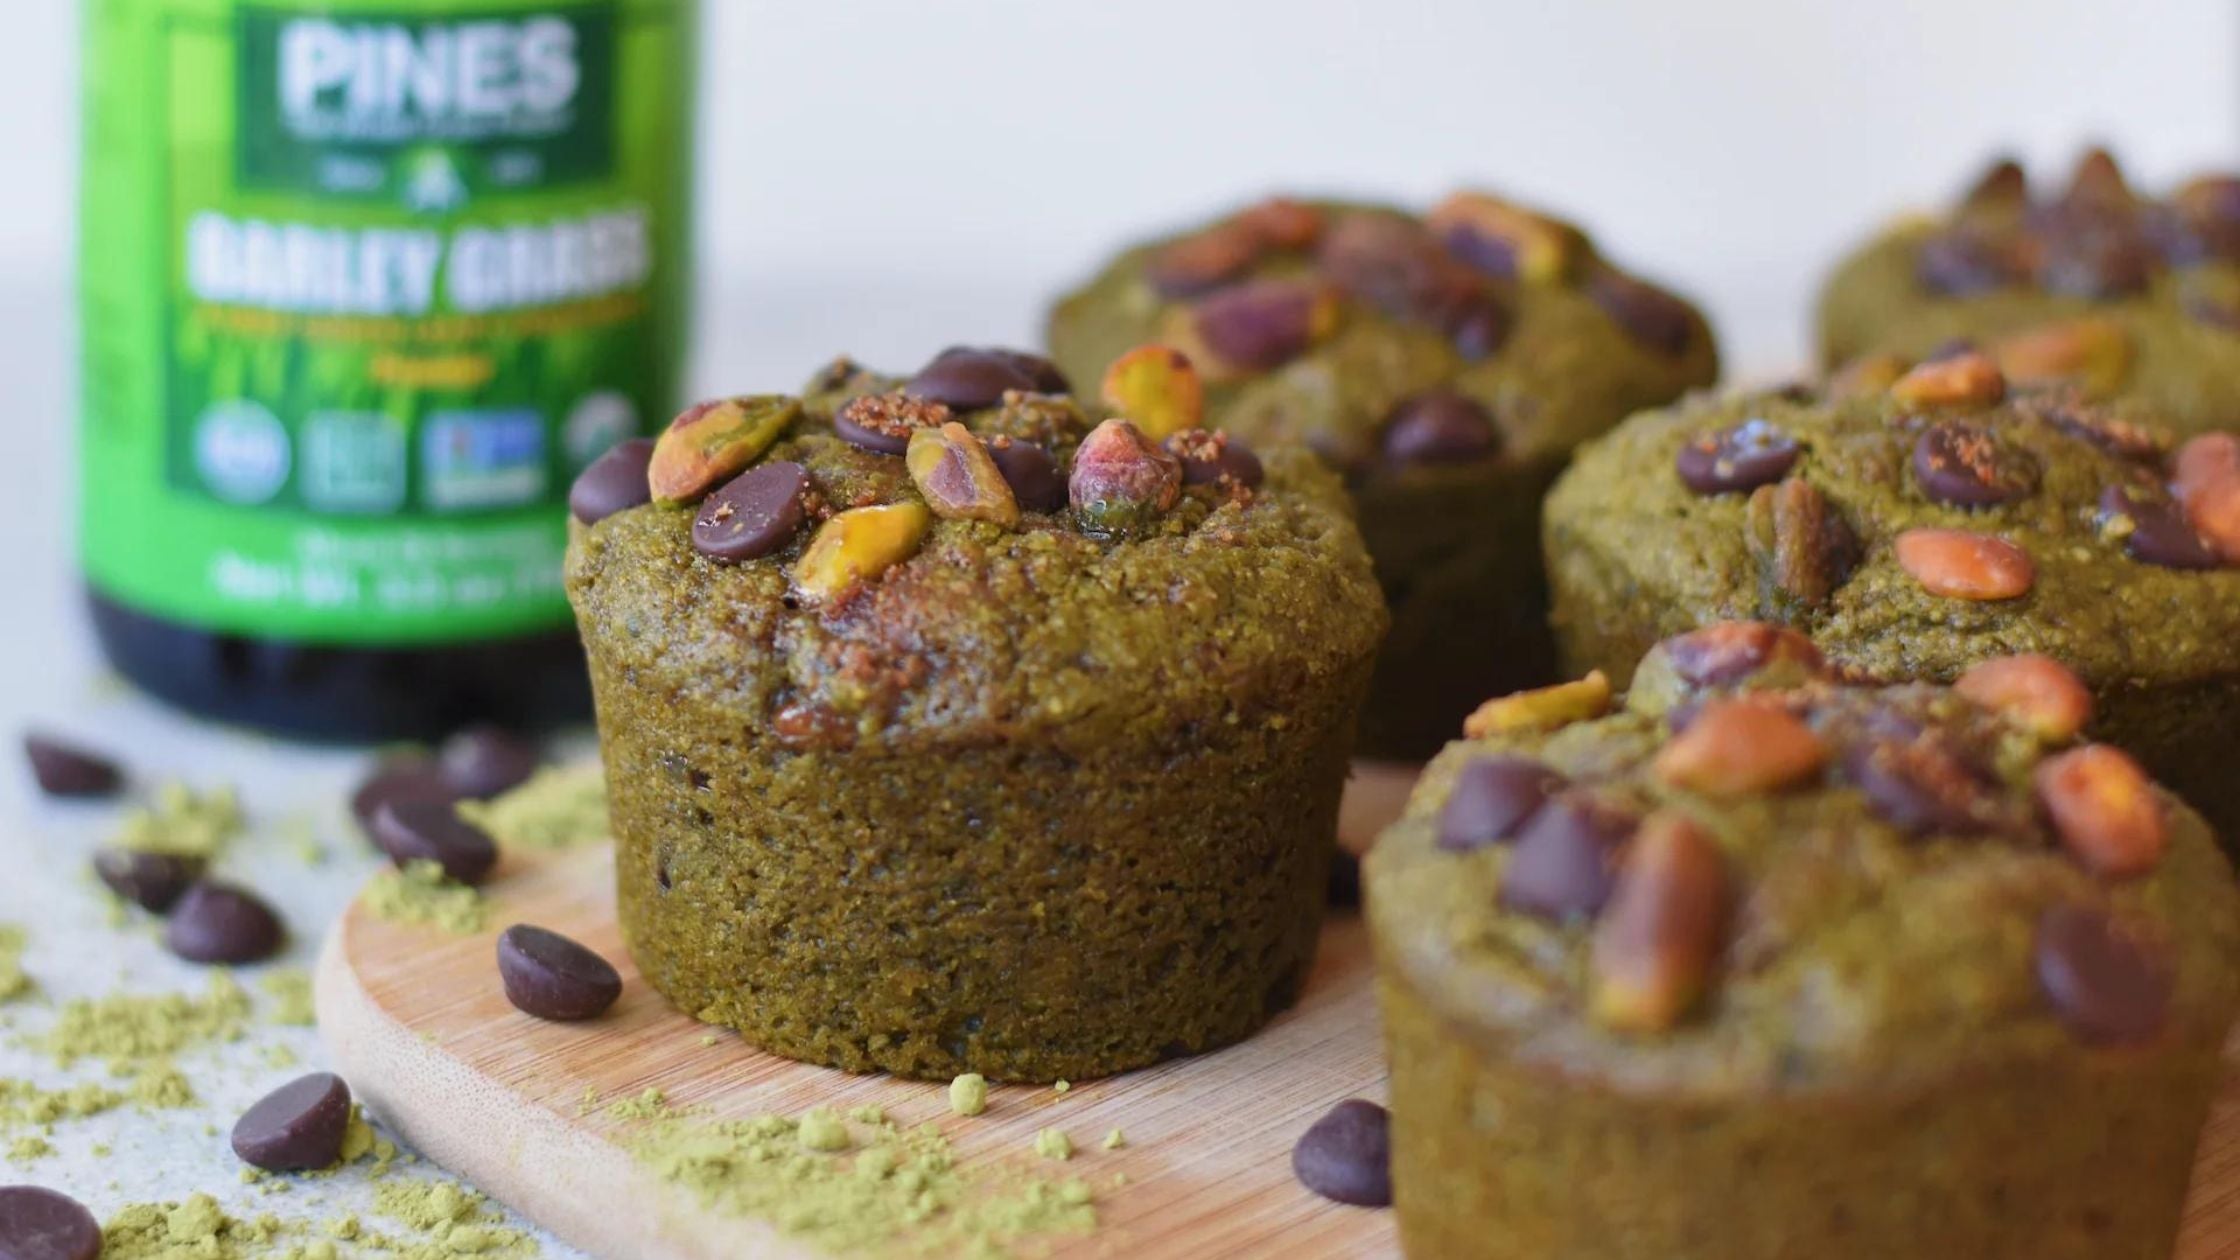 Matcha, barley grass, and pistachios make this muffin recipe delicious and nutritious!